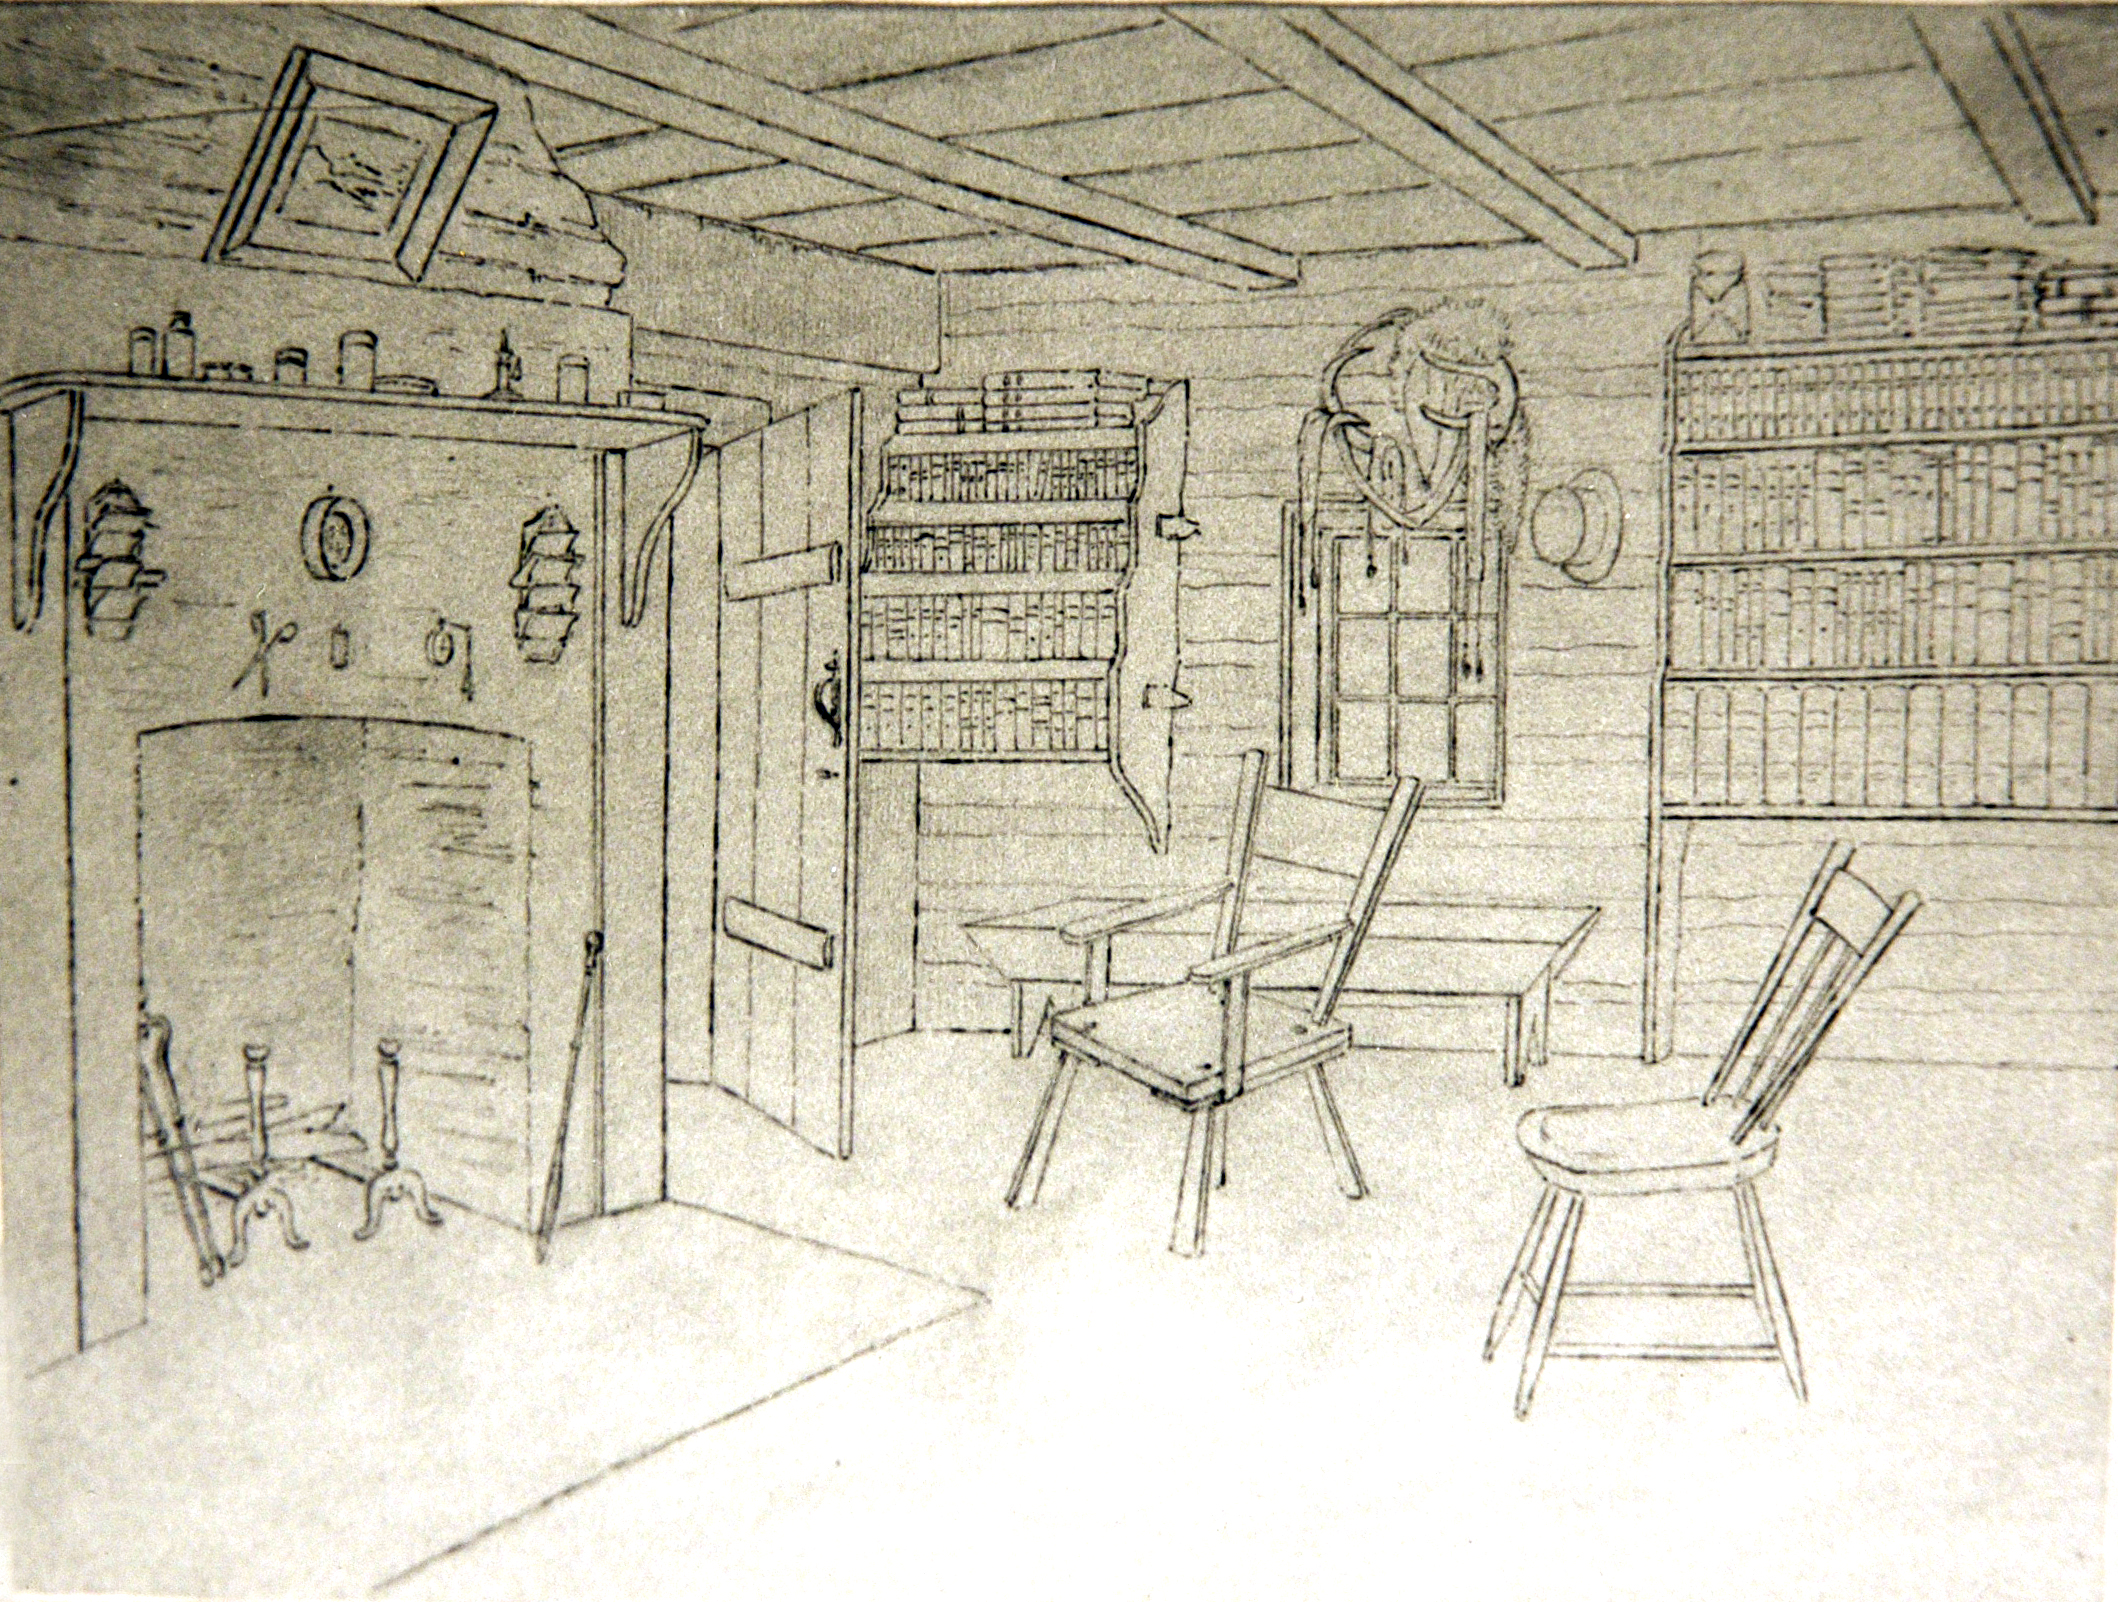 Miniature charcoal print titled two sides of one room. This is the side of John Langton's home that has the fireplace. It has two basic wooden chairs. There are two book cases on the wall opposite the fireplace with well over 100 books on it. Hanging on the wall is a hat, a saddle, scissors, pots and pans, and a framed print. The sketch represents a very basic cabin room of Upper Canada in 1830.